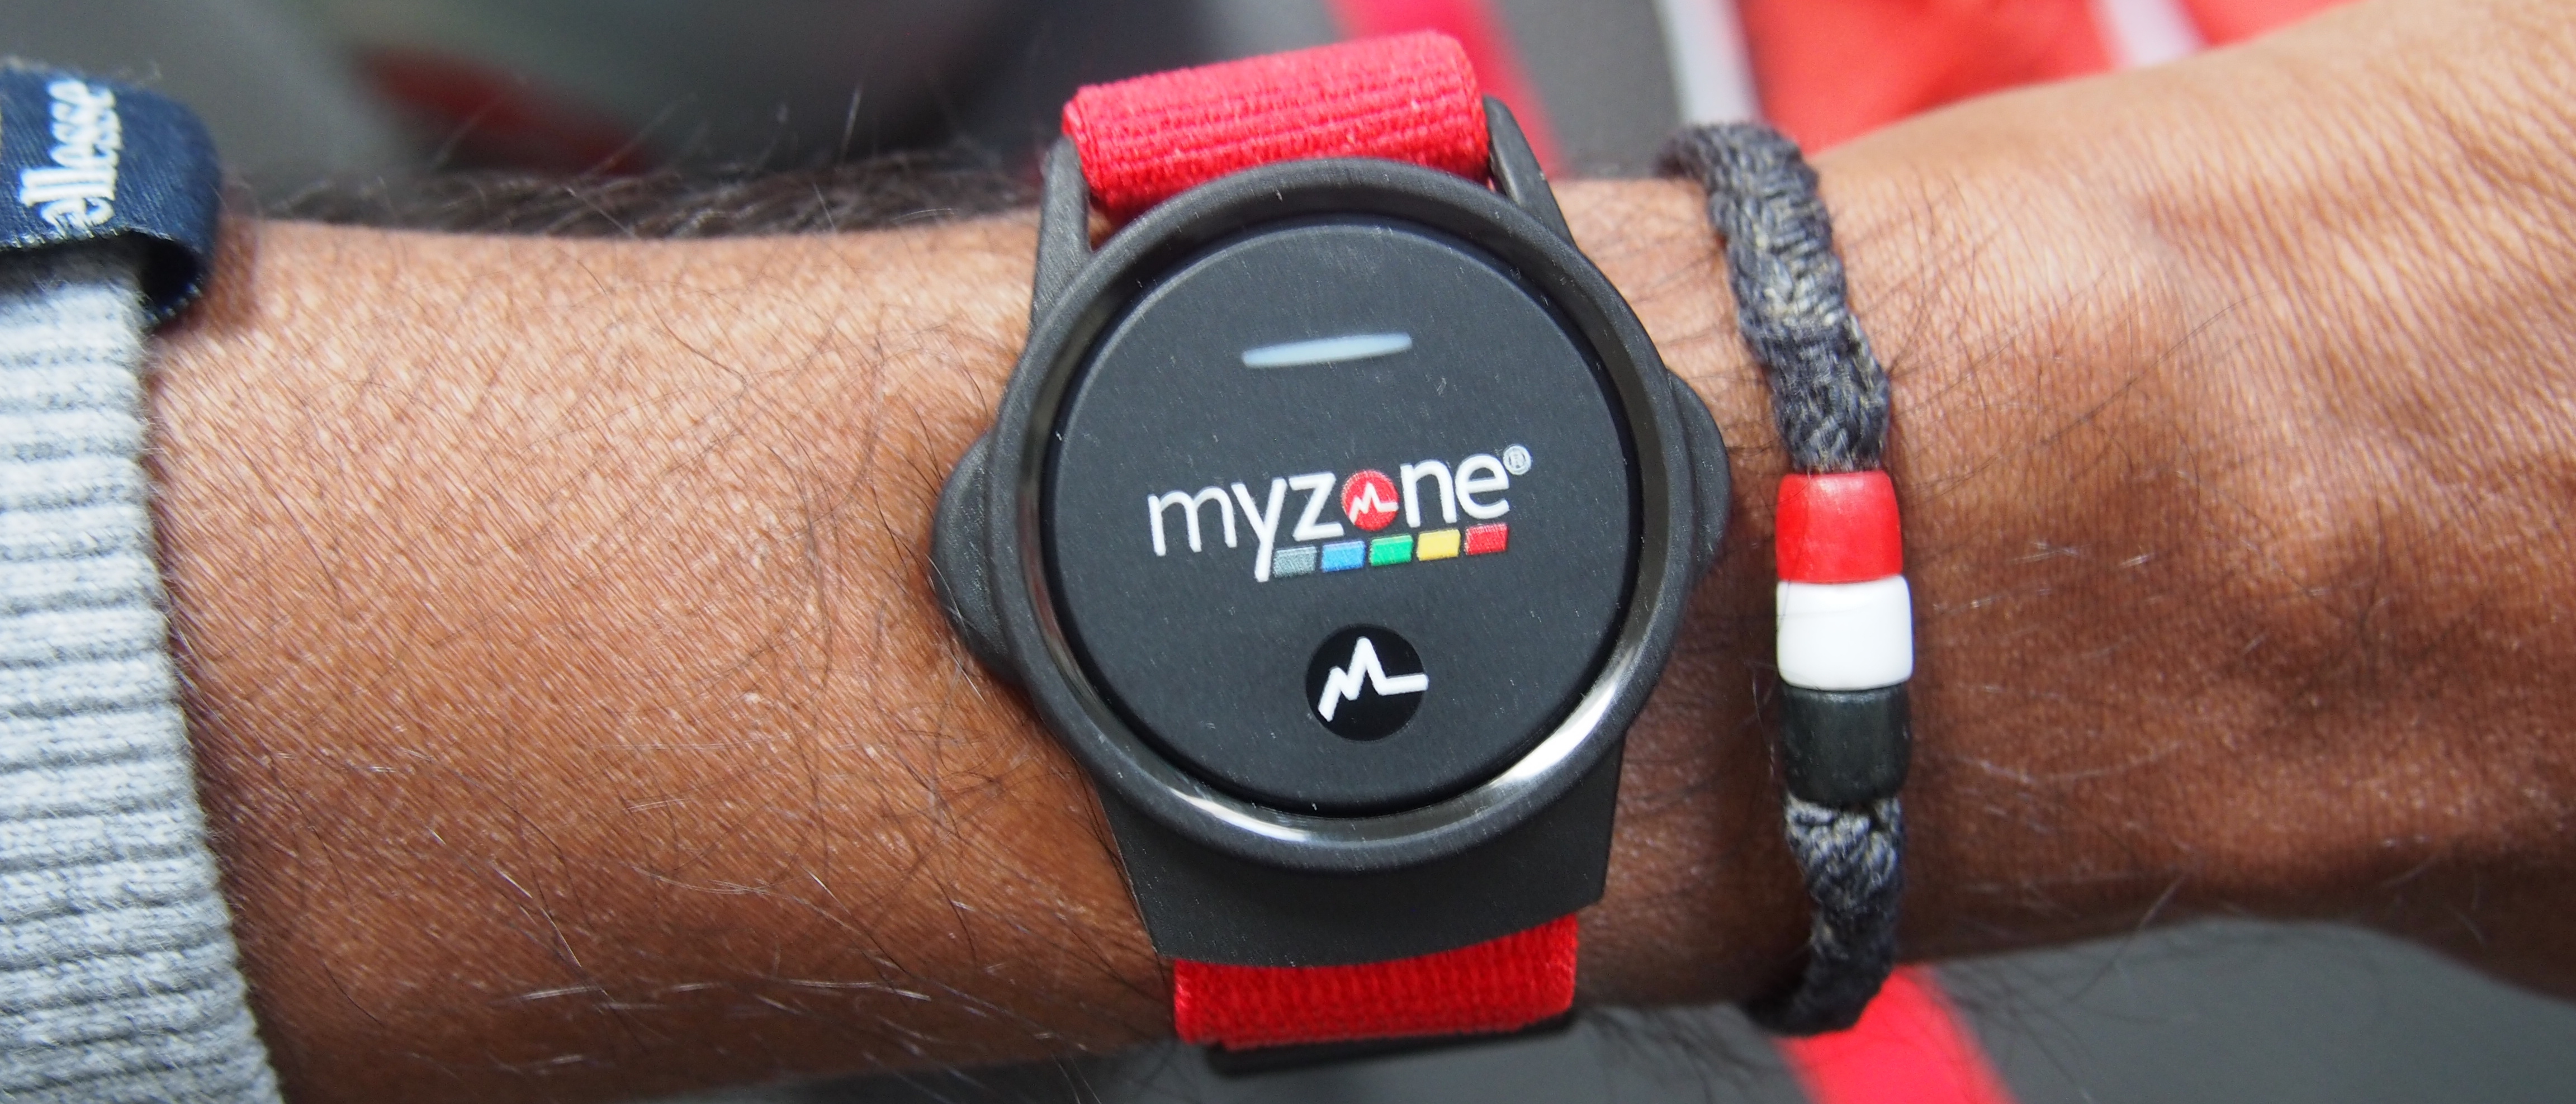 Amazon.com : Myzone MZ-3 Physical Activity Chest Strap Heart Rate Monitor -  Fitness & Activity Tracker : Sports & Outdoors